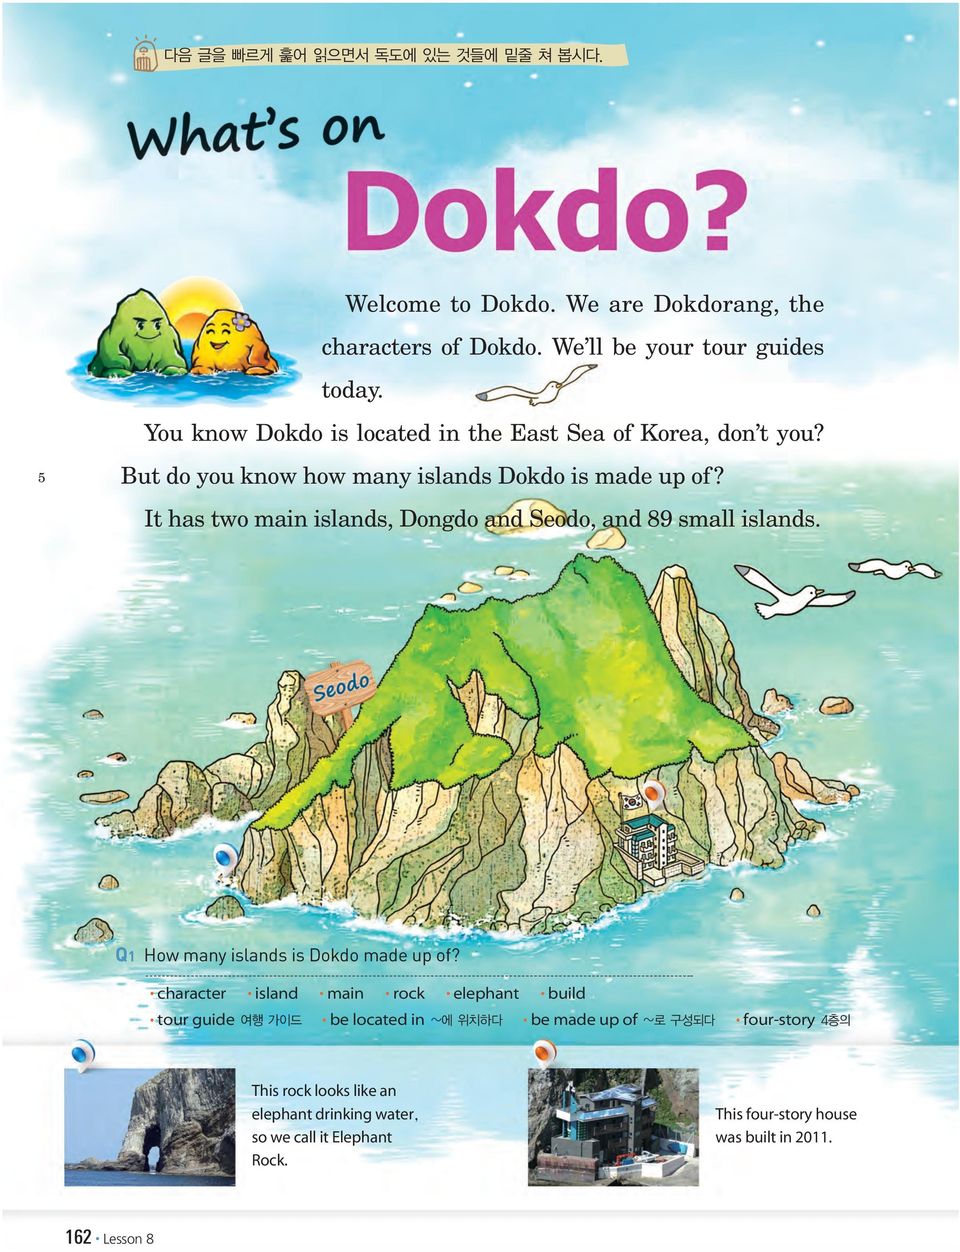 It has two main islands, Dongdo and Seodo, and 89 small islands. Q1 How many islands is Dokdo made up of?